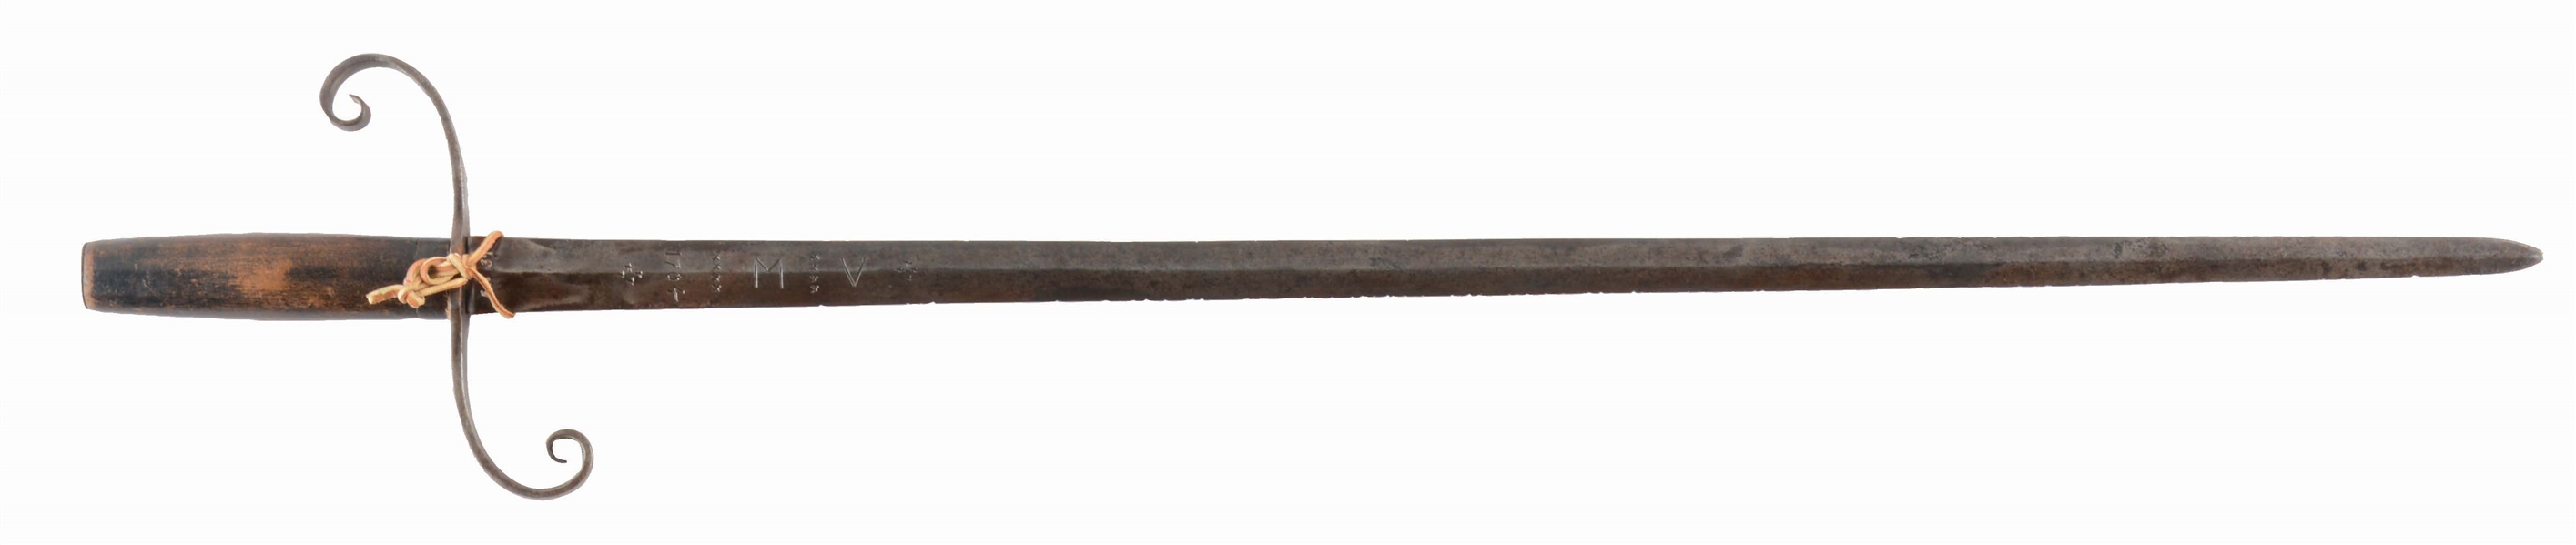 COMPOSITE SWORD WITH BLADE DATED 1704.